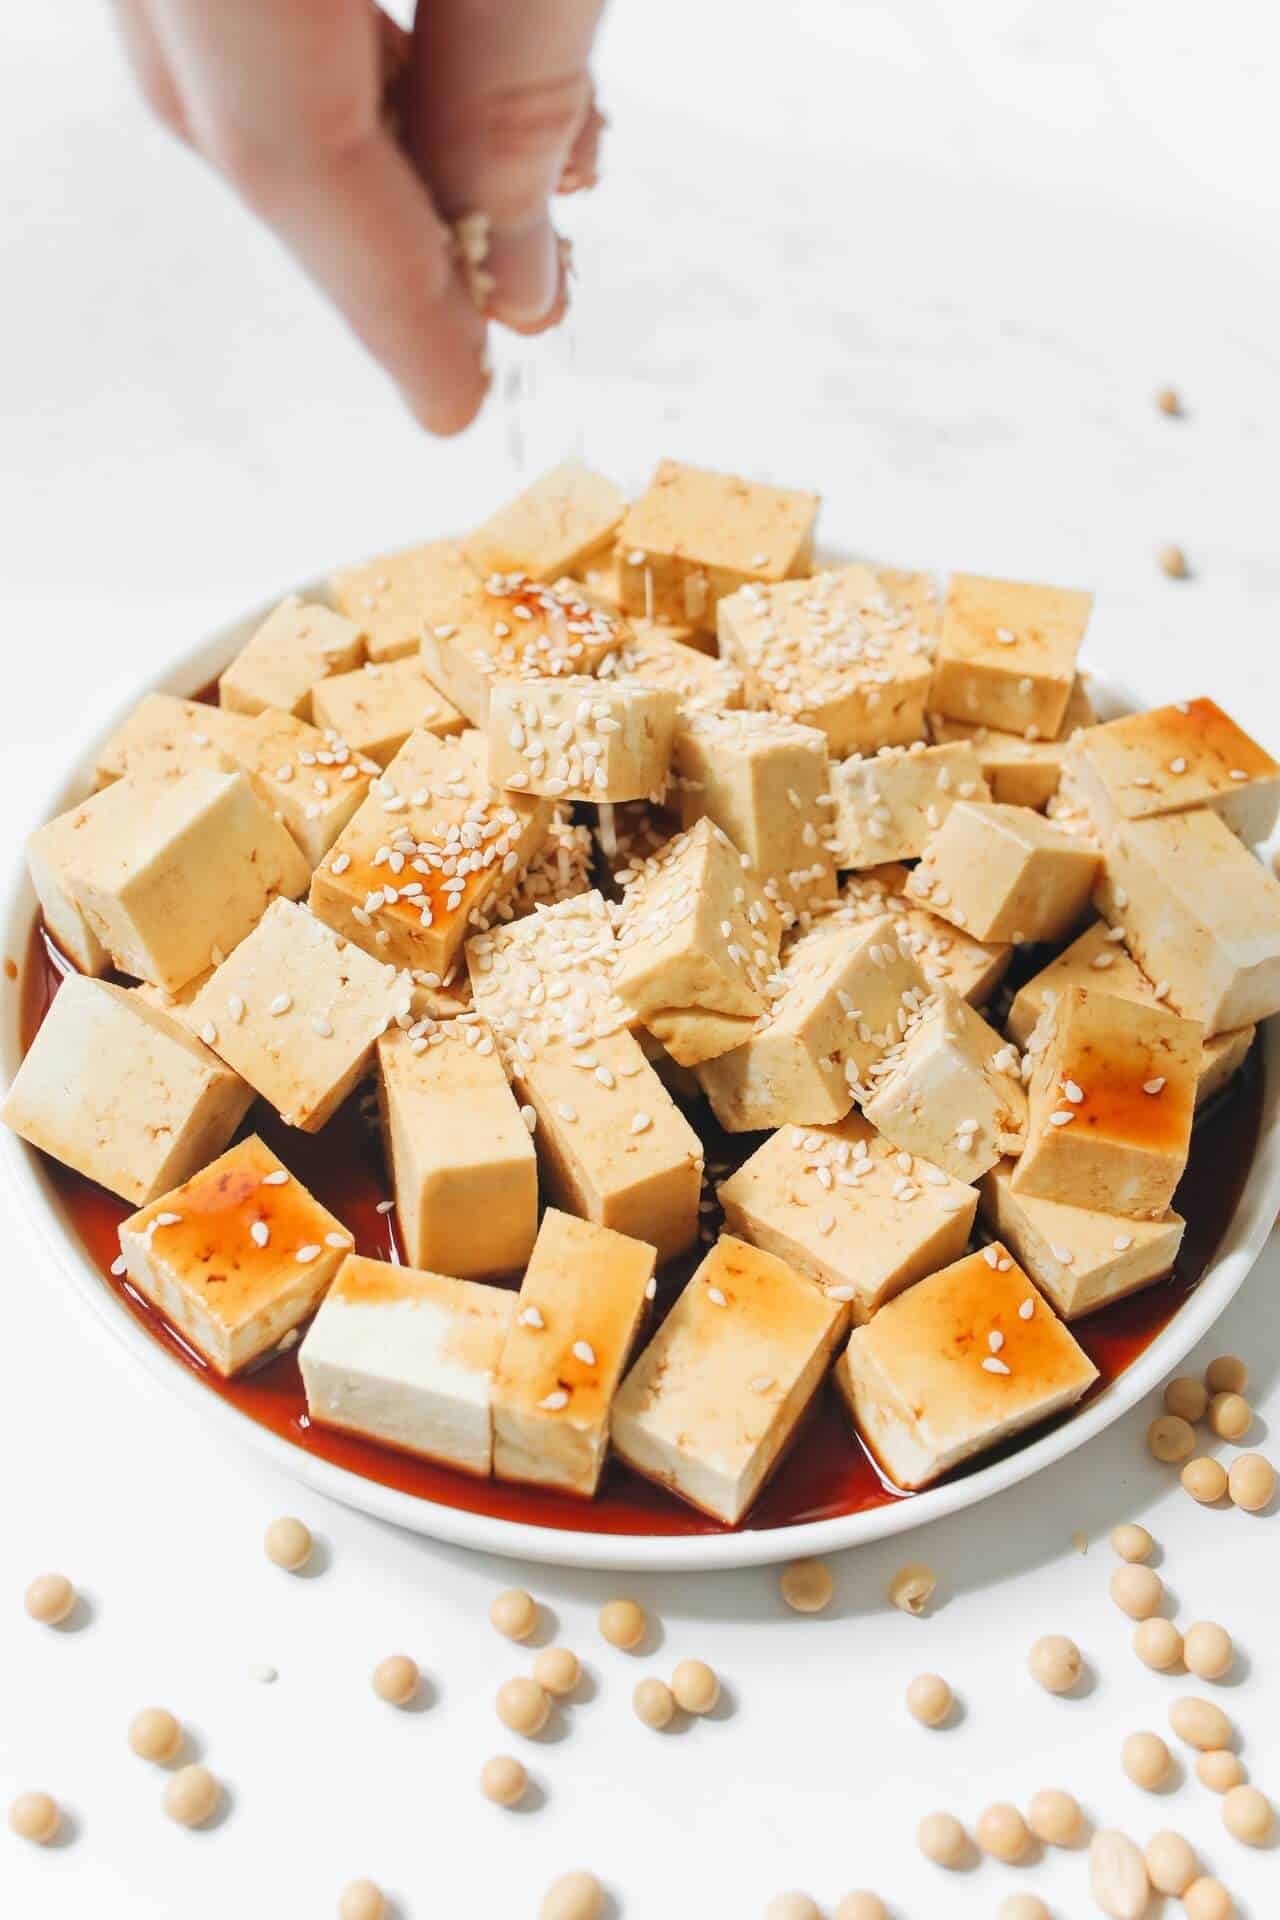 How to love tofu? Read on if you haven’t tried it yet